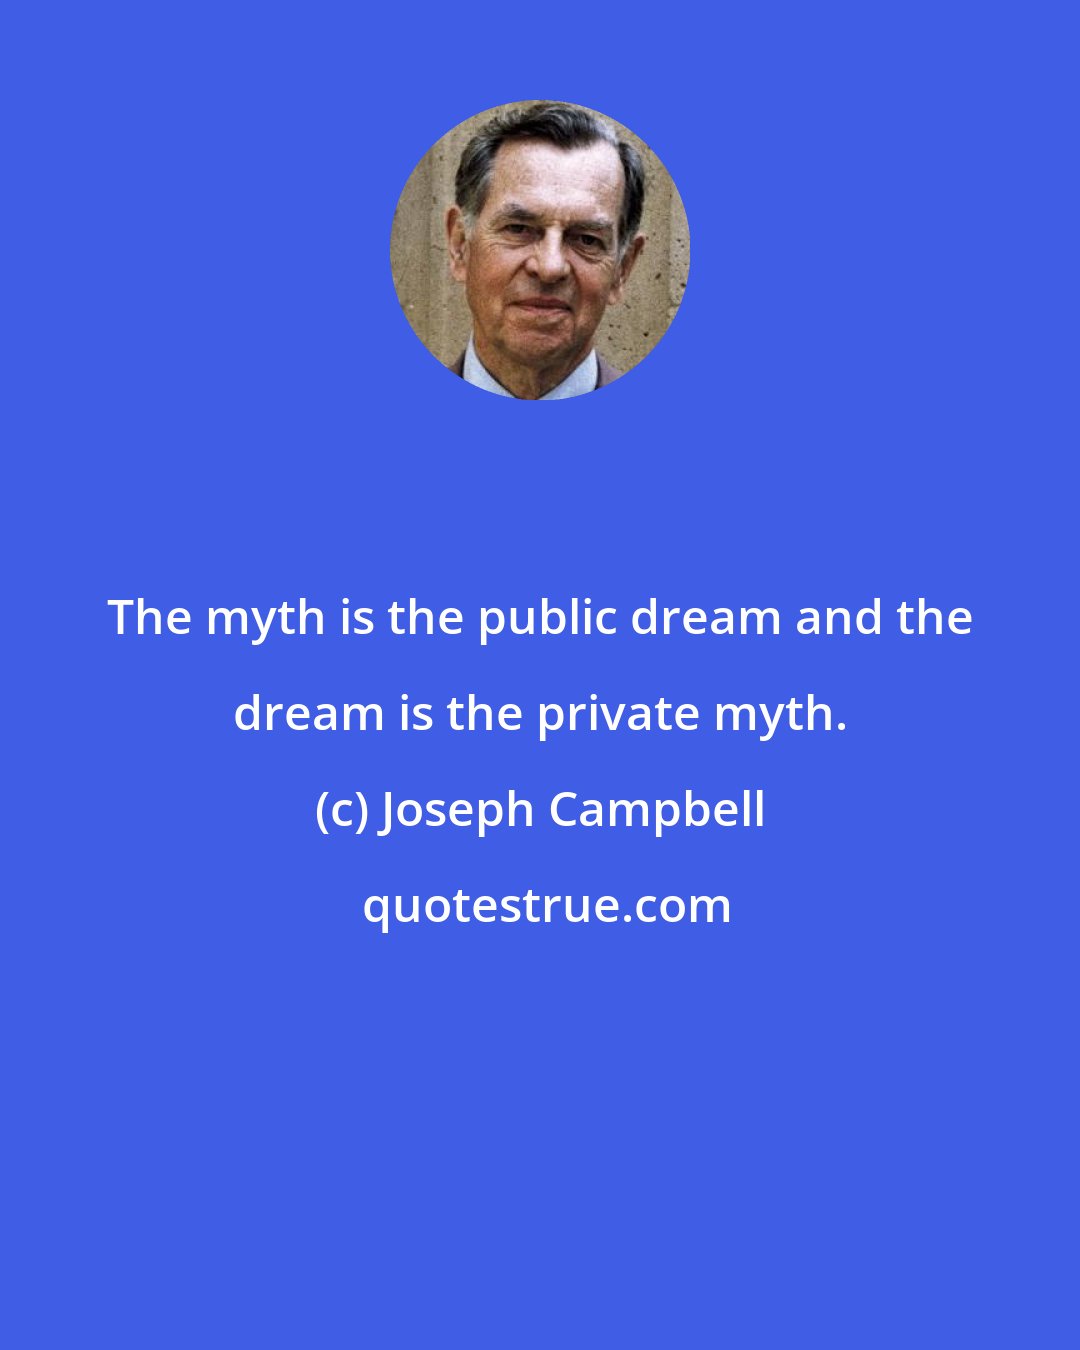 Joseph Campbell: The myth is the public dream and the dream is the private myth.